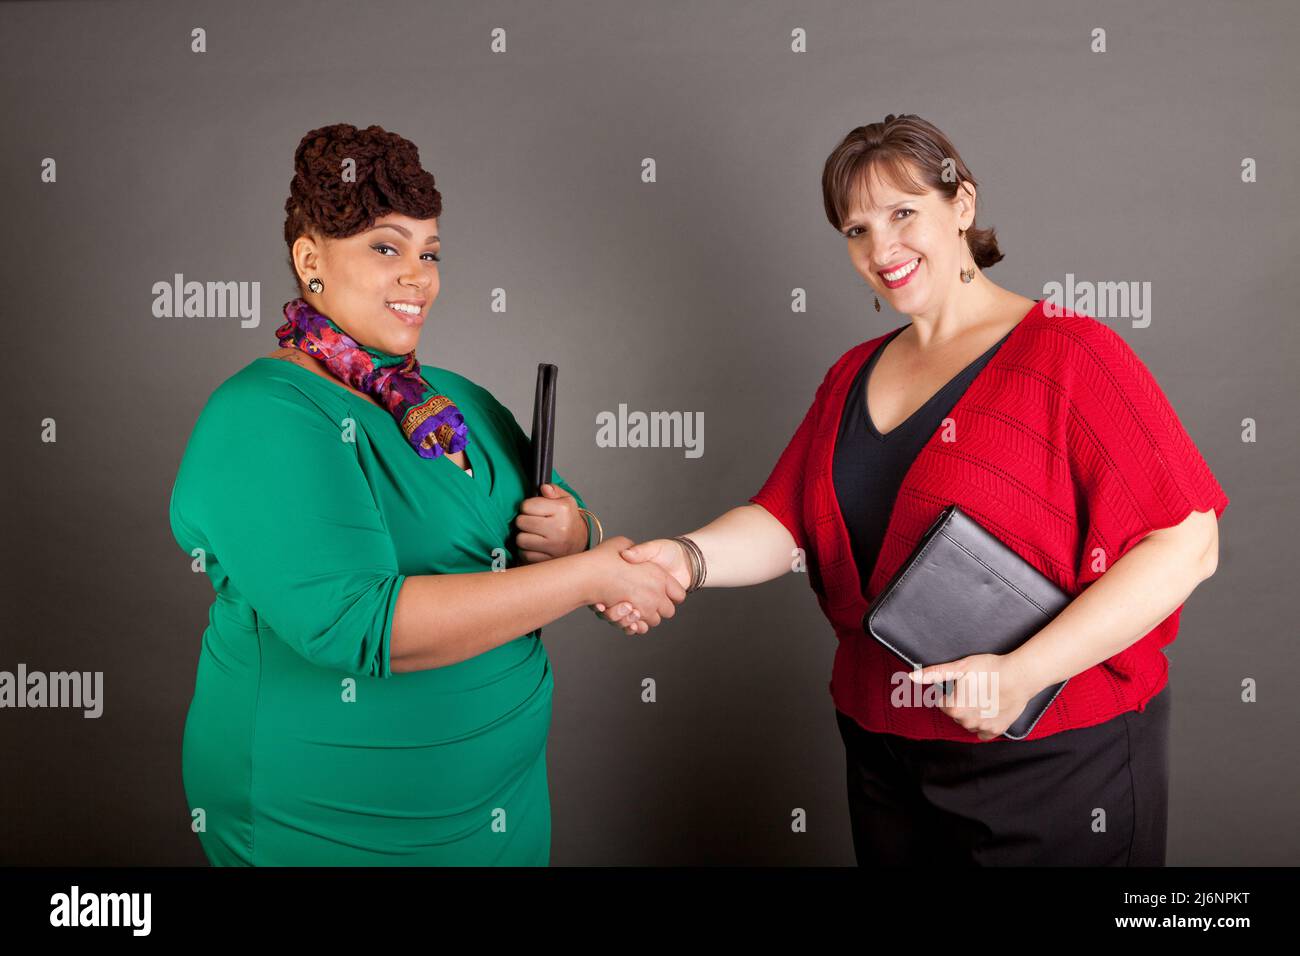 Happy, smiling plus size women of different races shaking hands holding business portfolios Stock Photo